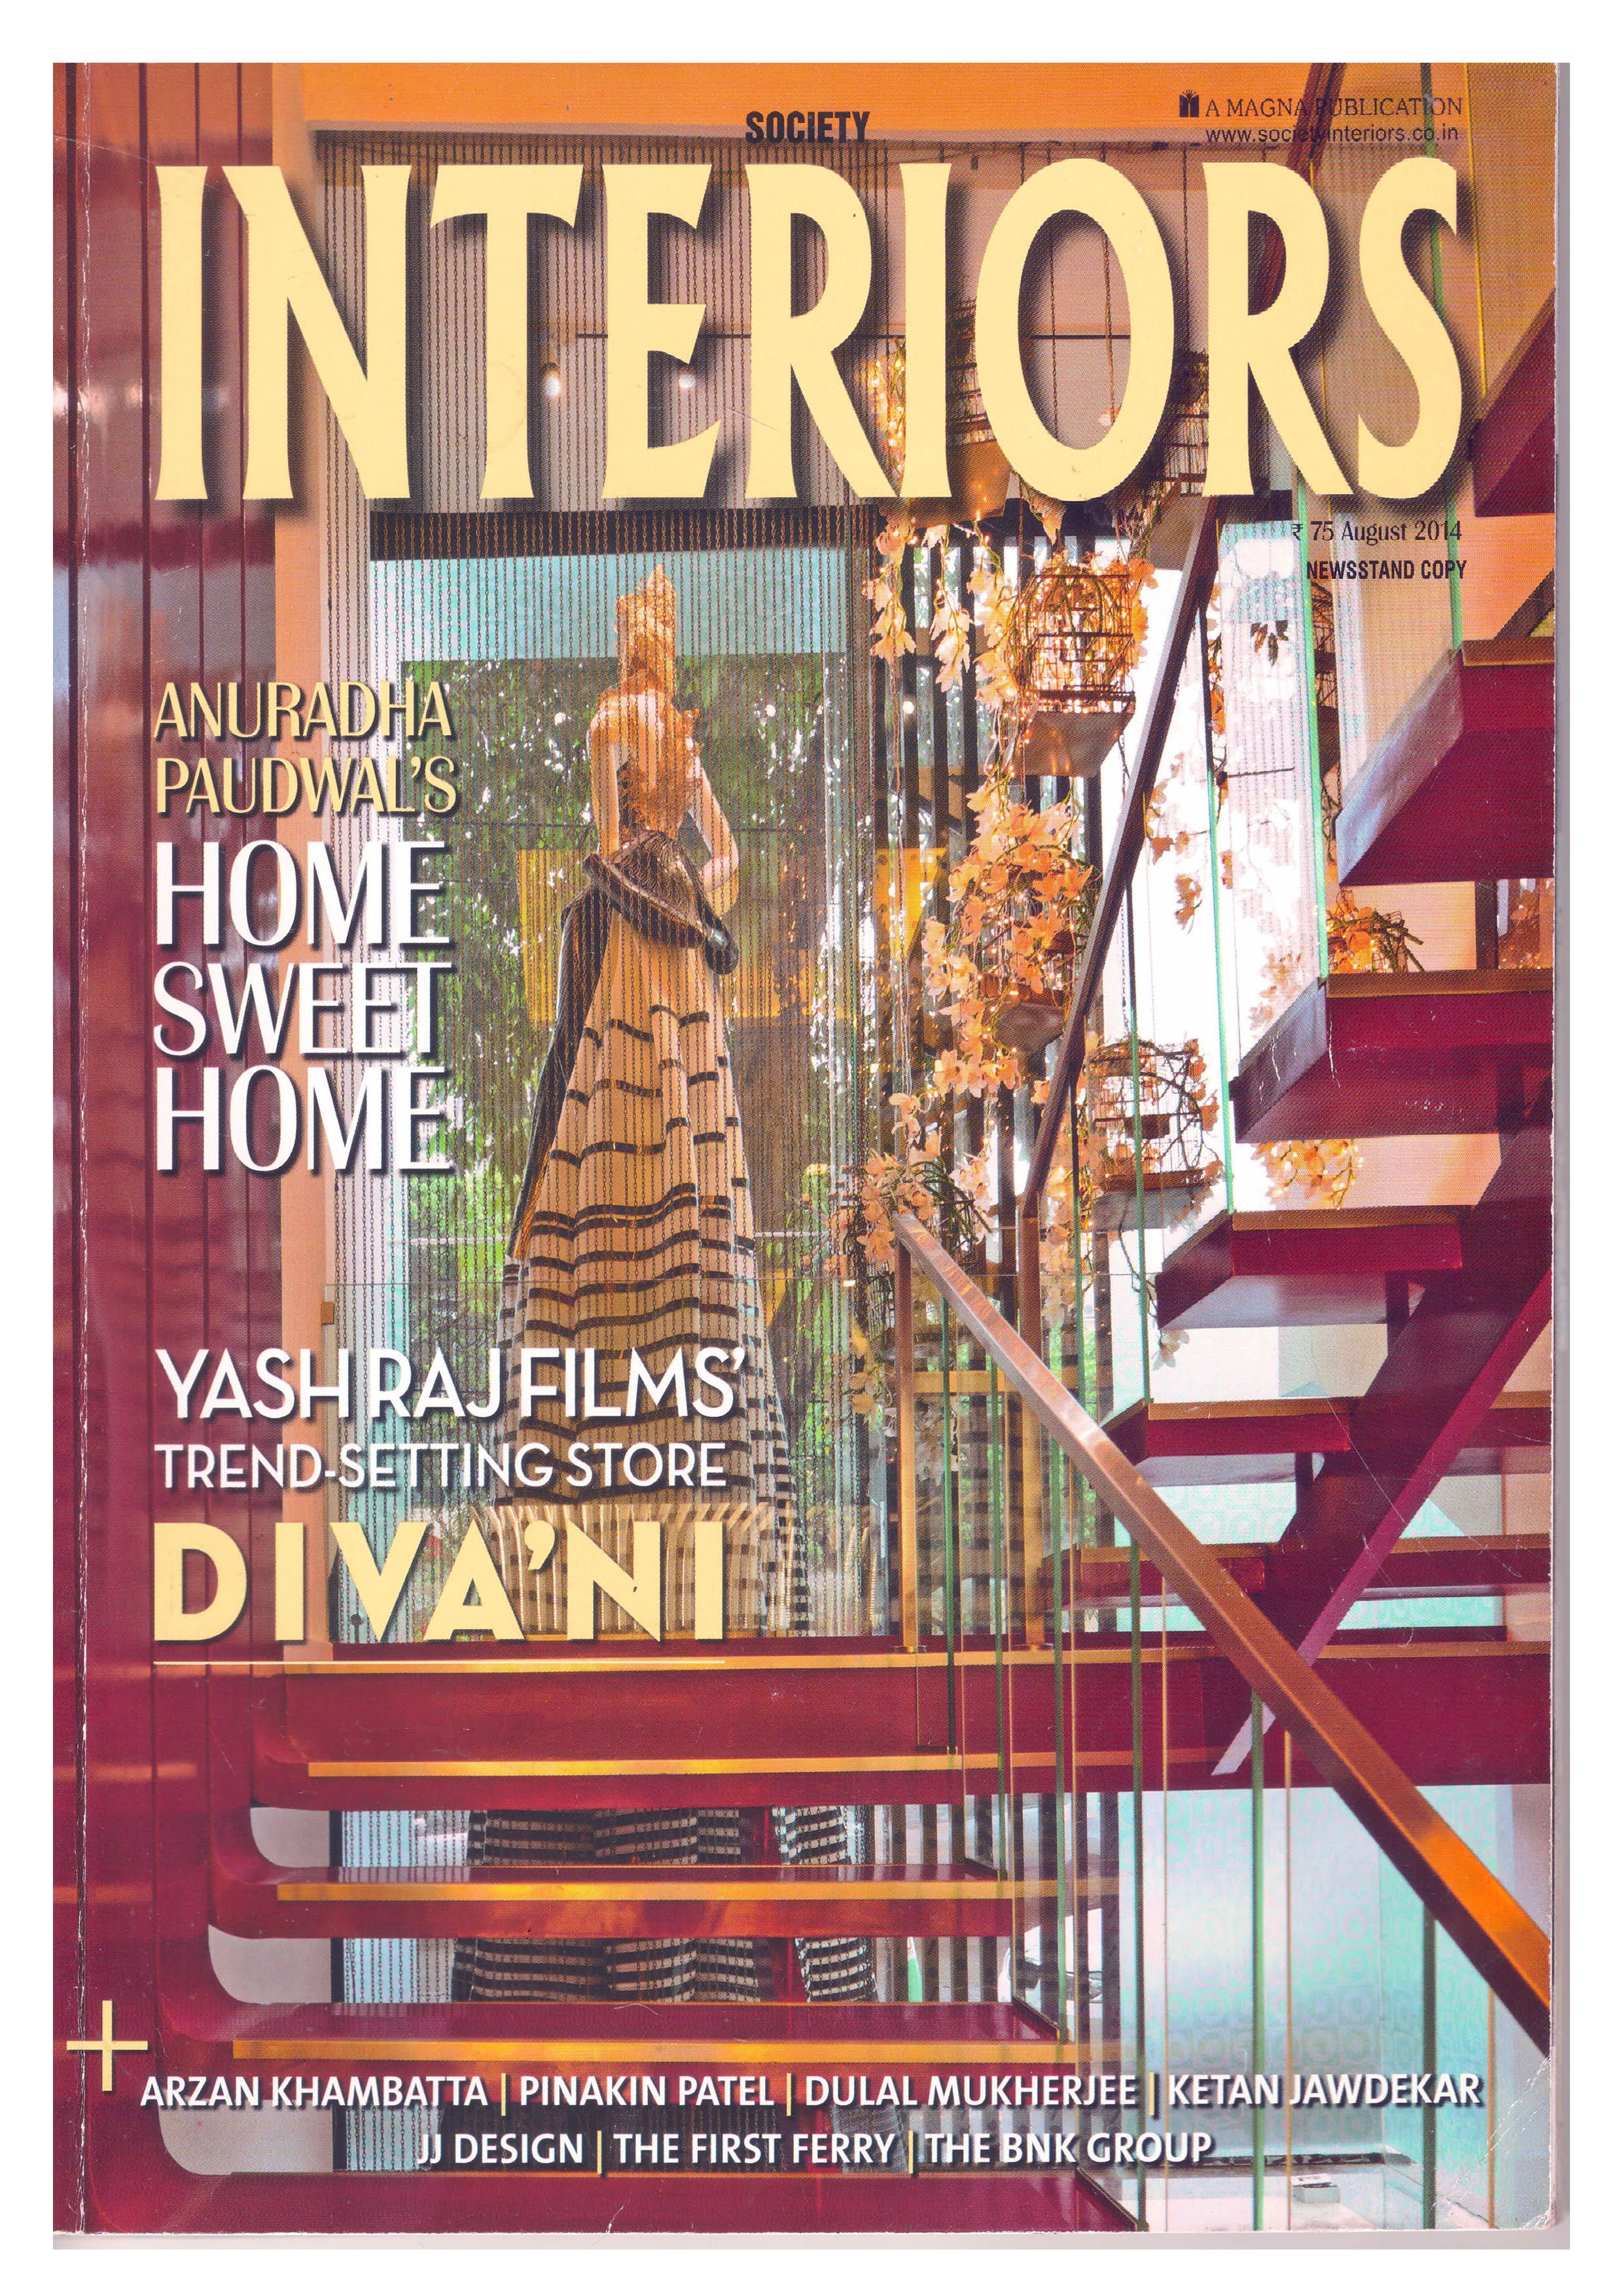 Society Interiors Cover - August 2014